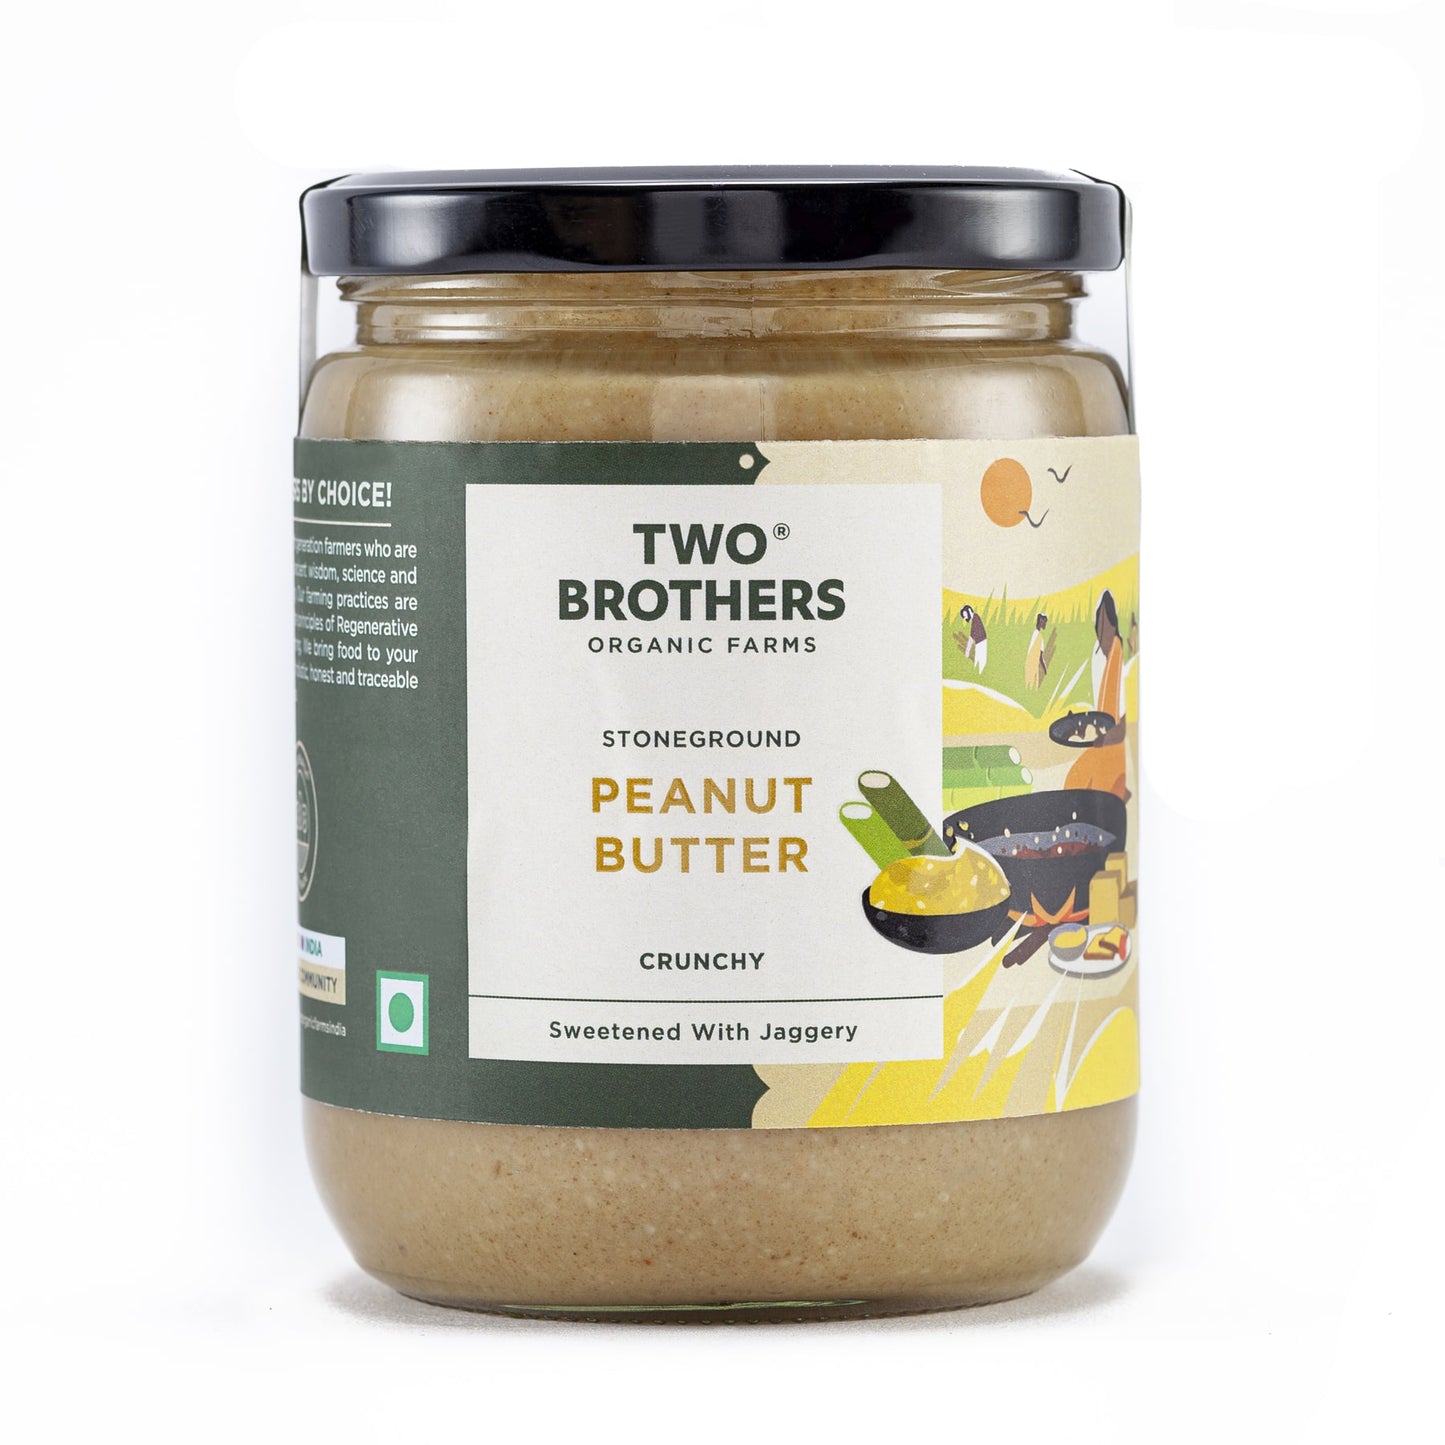 Buy Two Brothers AMOREARTH Jaggery Peanut Butter crunchy online